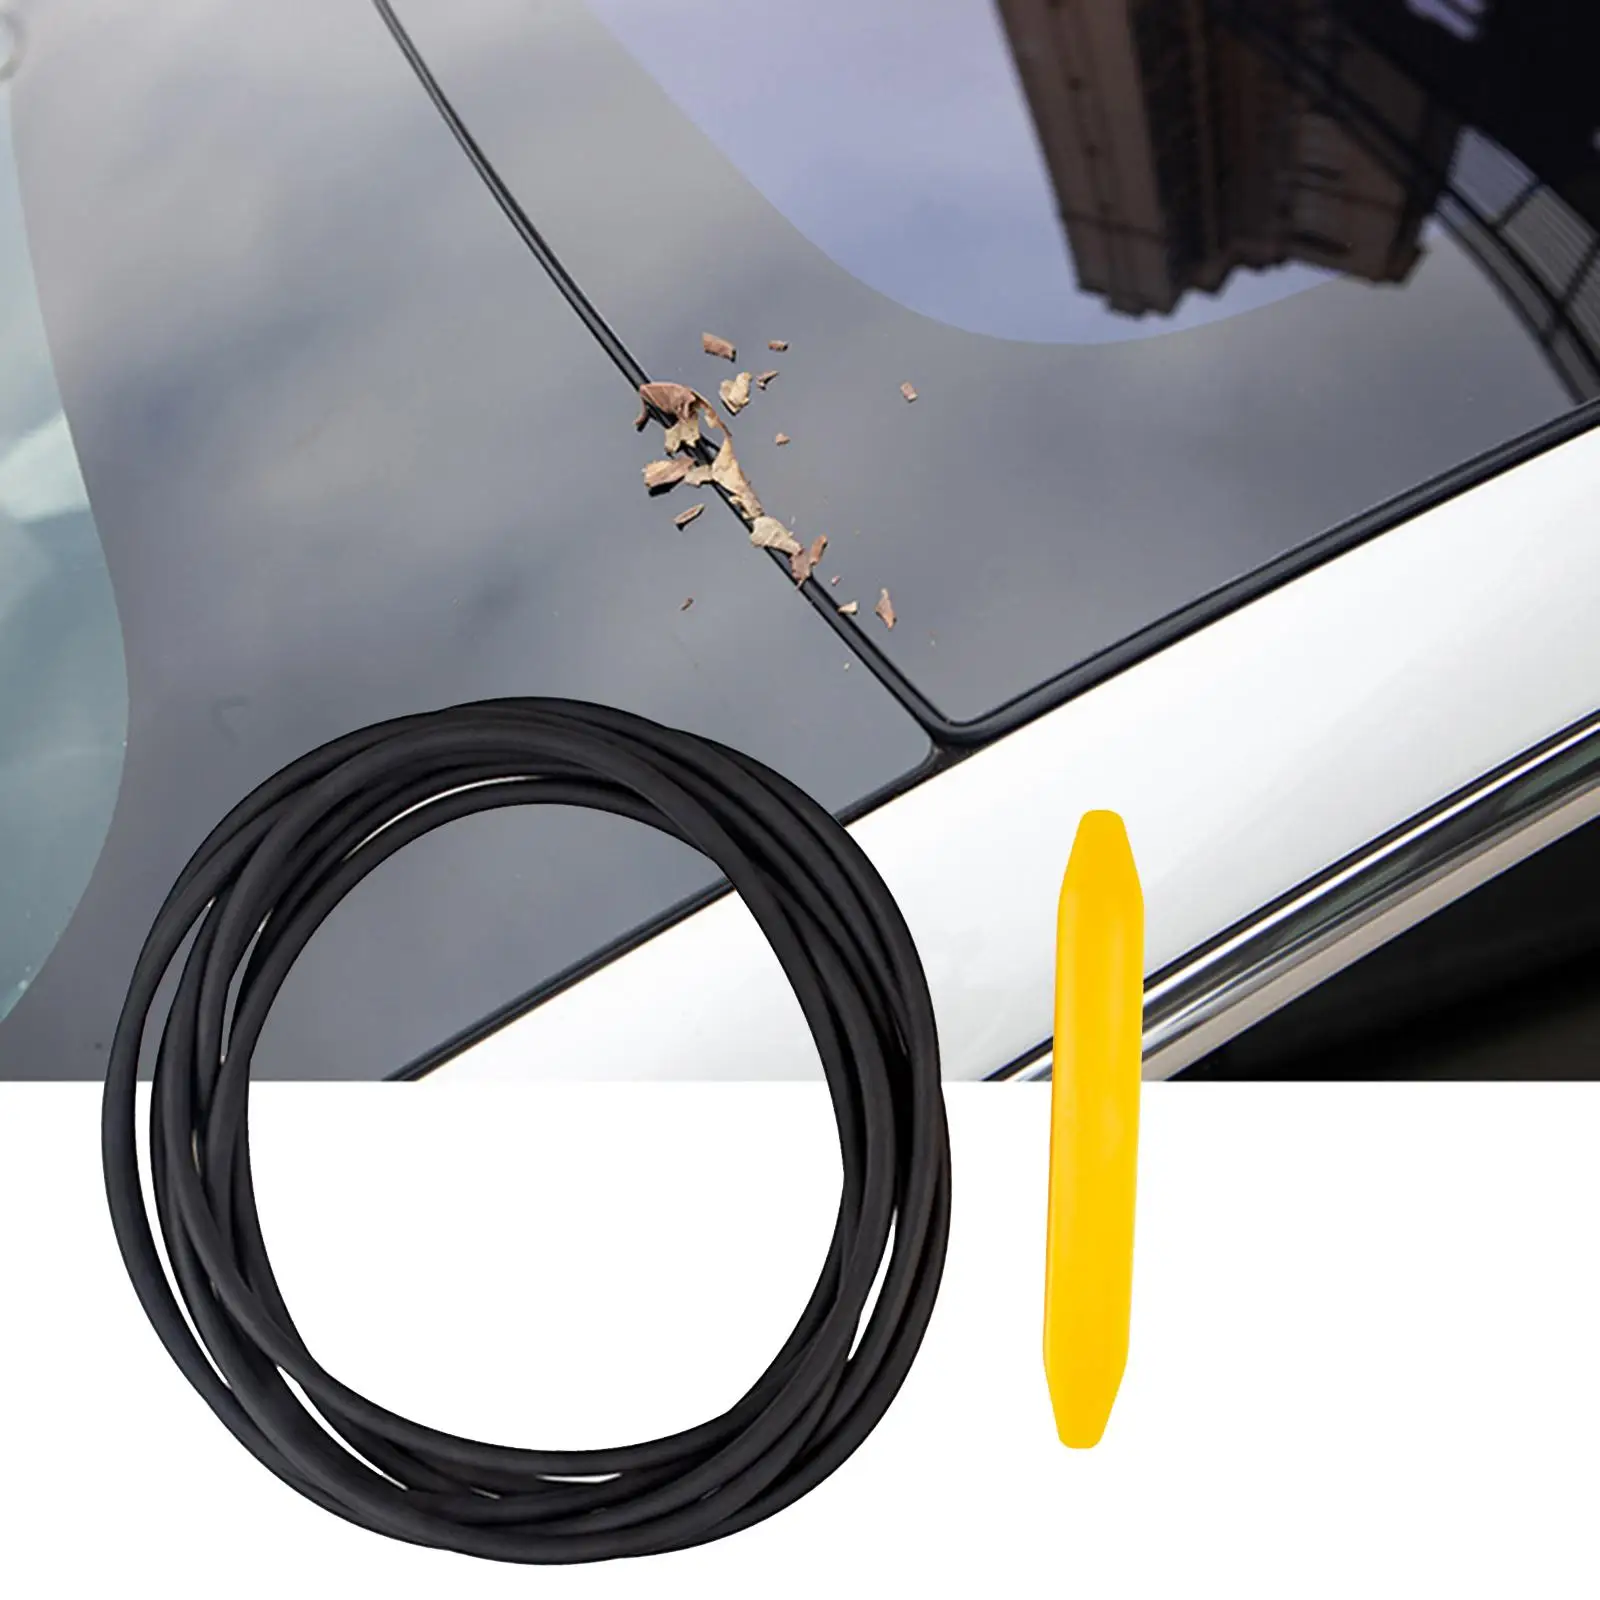 Silicone Sunroof Seal Strip Windshield Noise Reduction Weather Strip Parts Car Skylight Sealing Strip for 